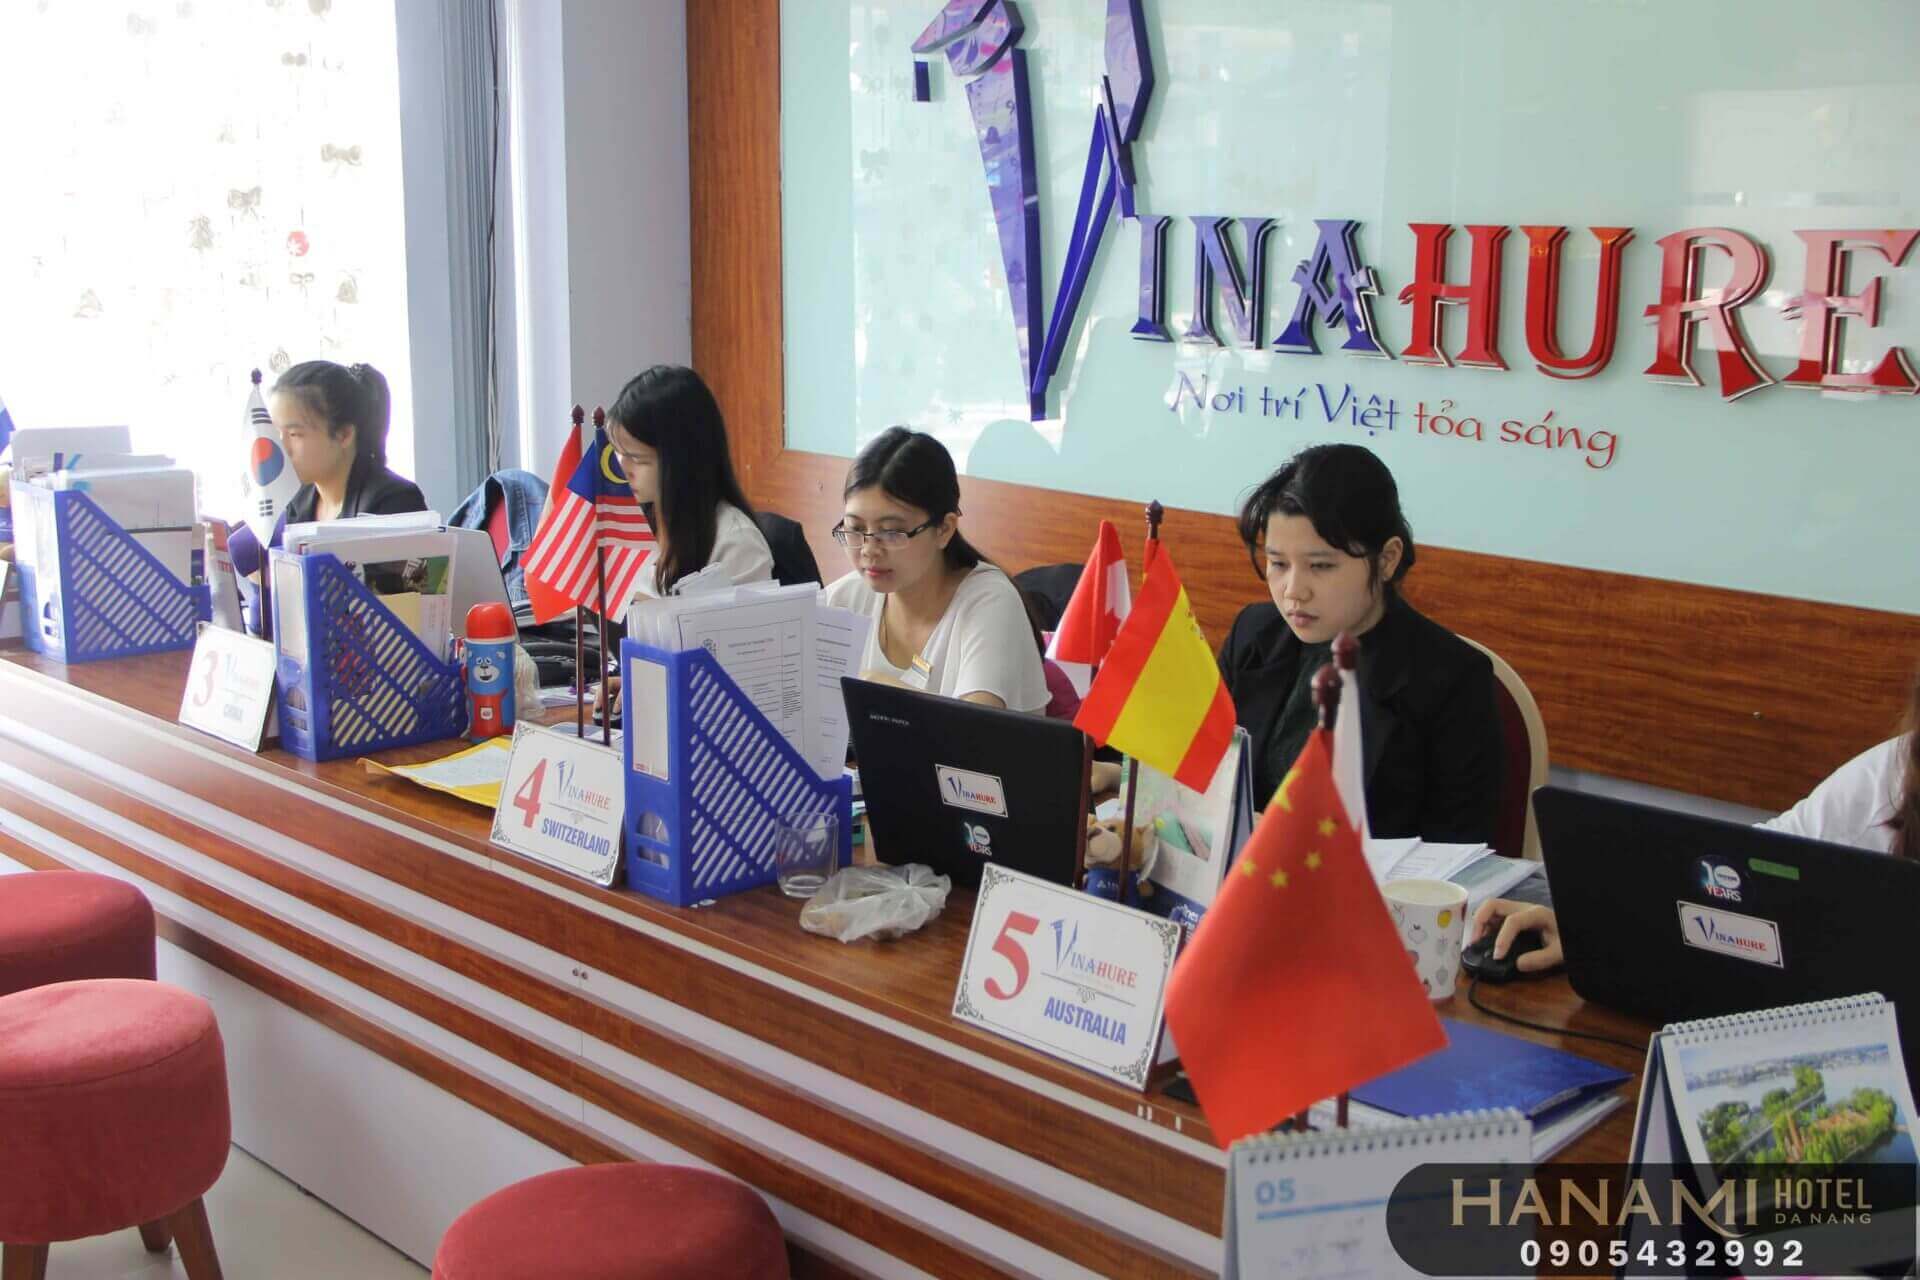 South Korean Study Abroad Consulting Centers in Da Nang